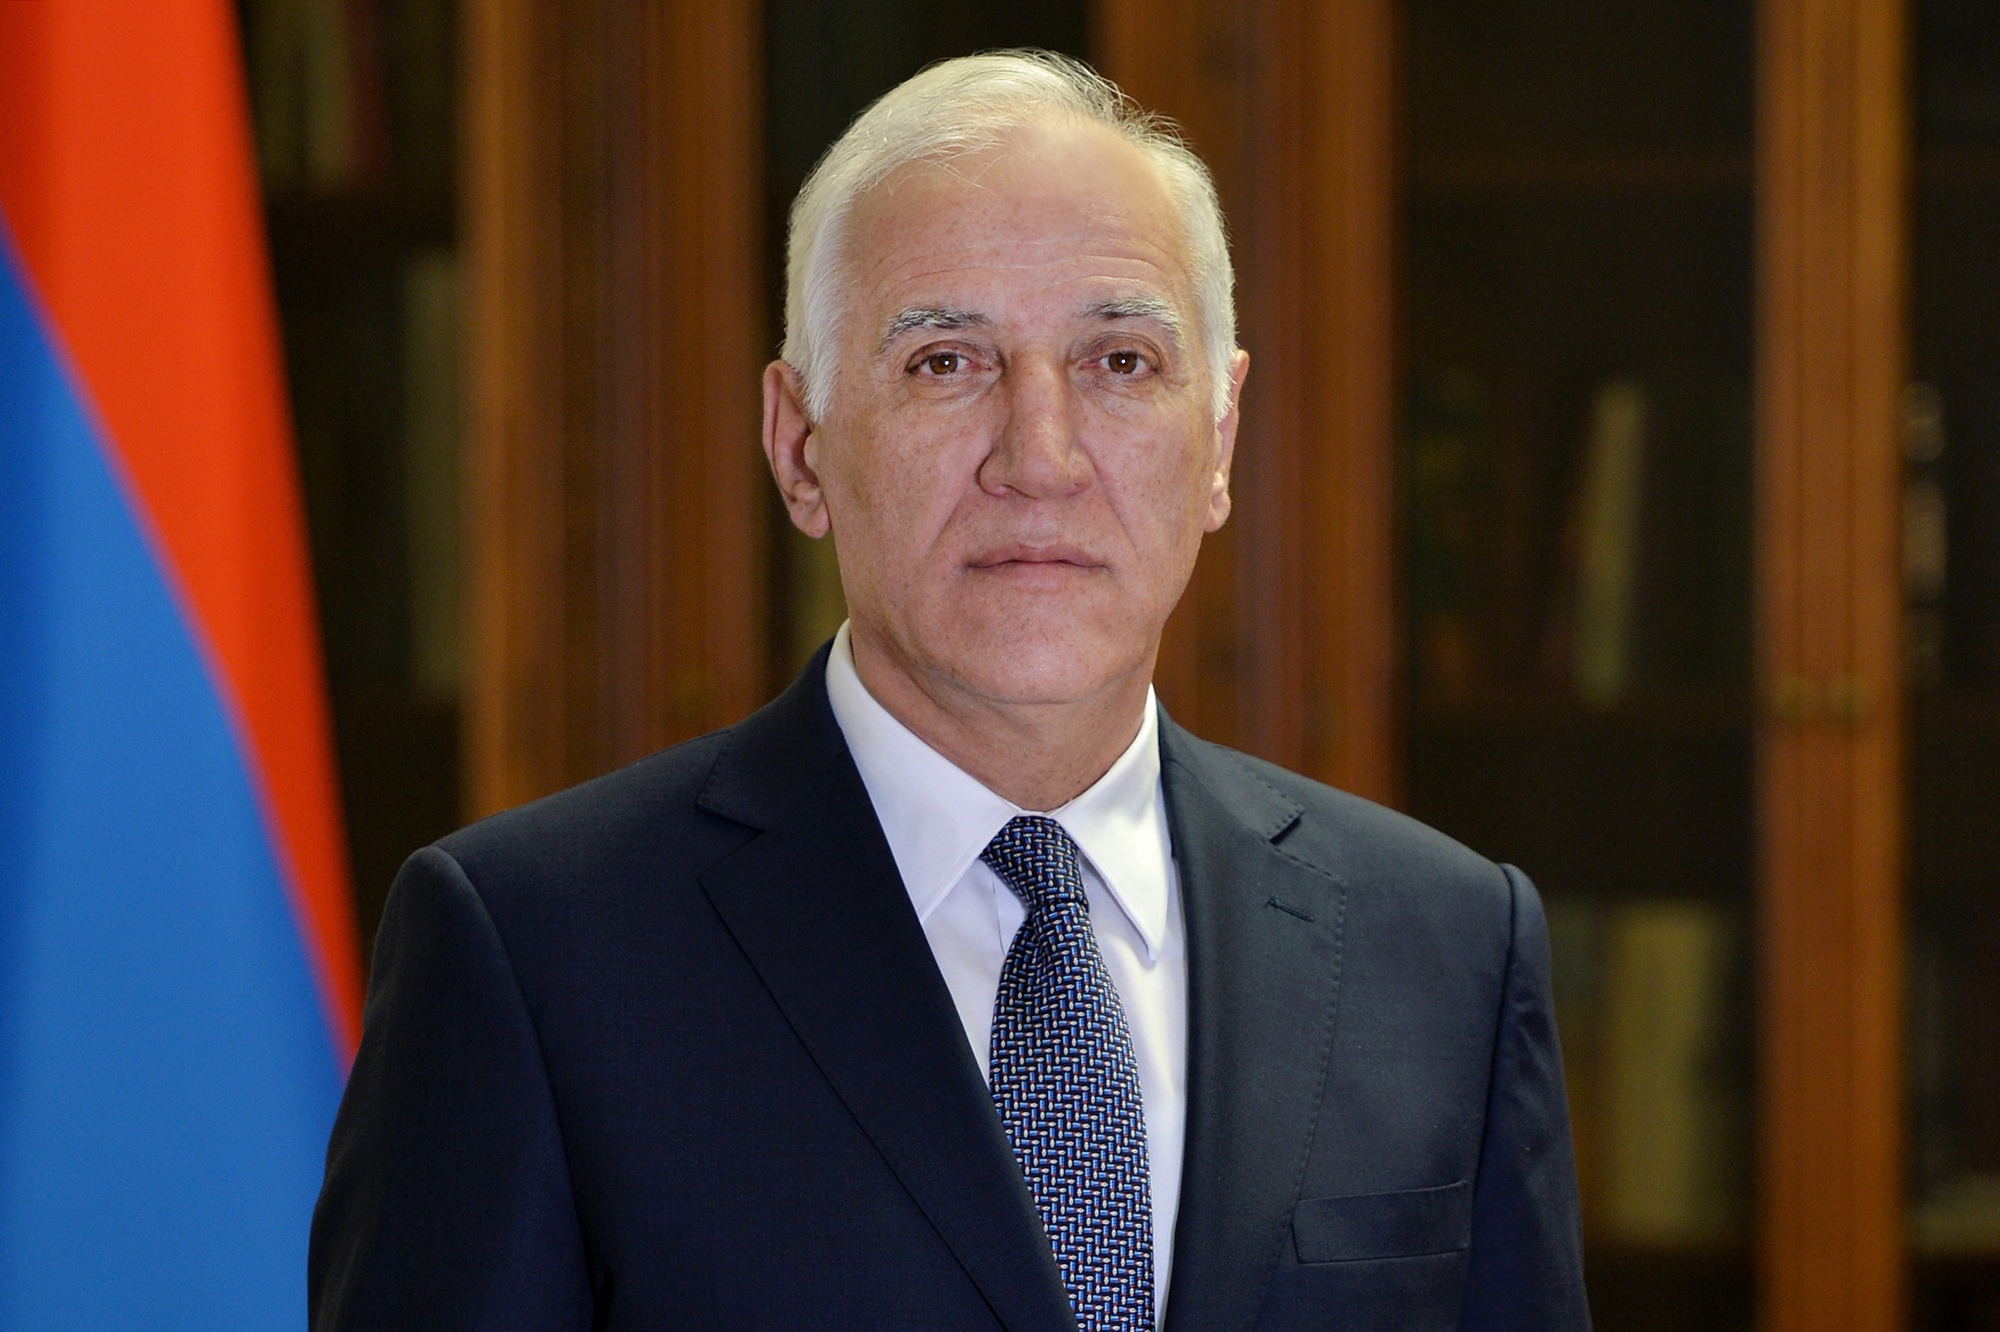 President Vahagn Khachaturyan will participate in the 27th Conference of the Parties to the United Nations Framework Convention on Climate Change